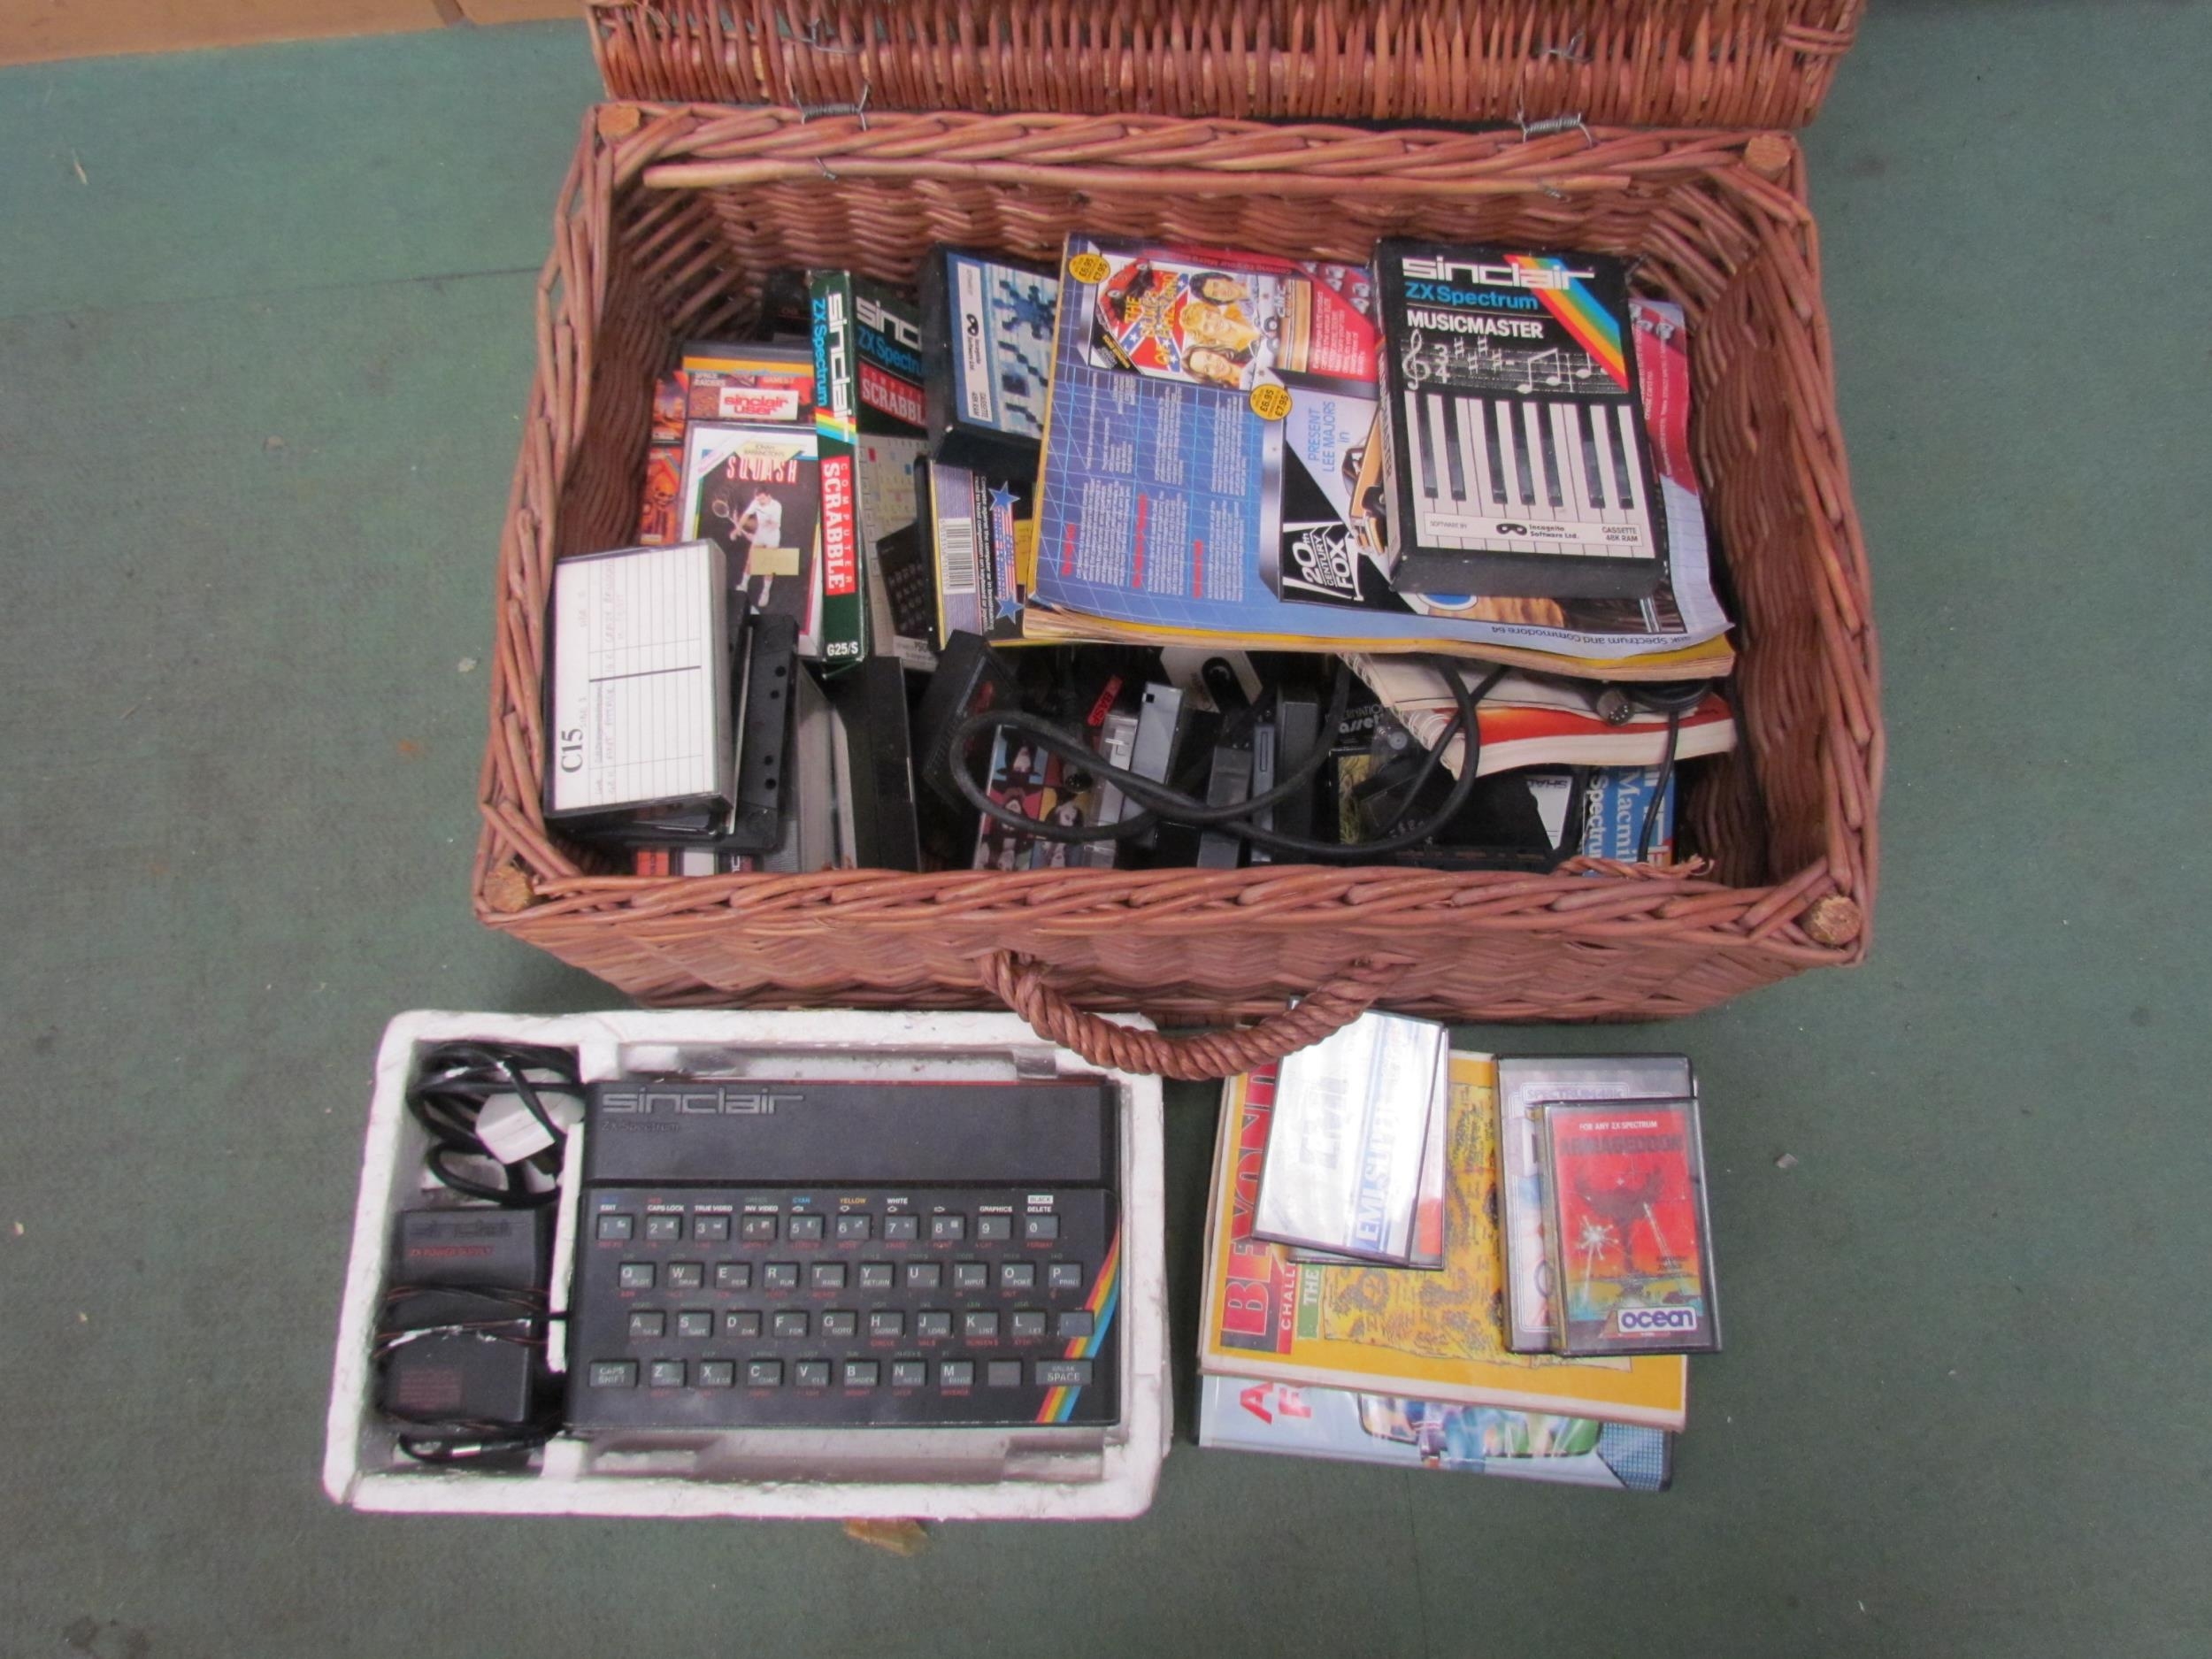 A Sinclair ZX Spectrum computer games console with a good quantity of games